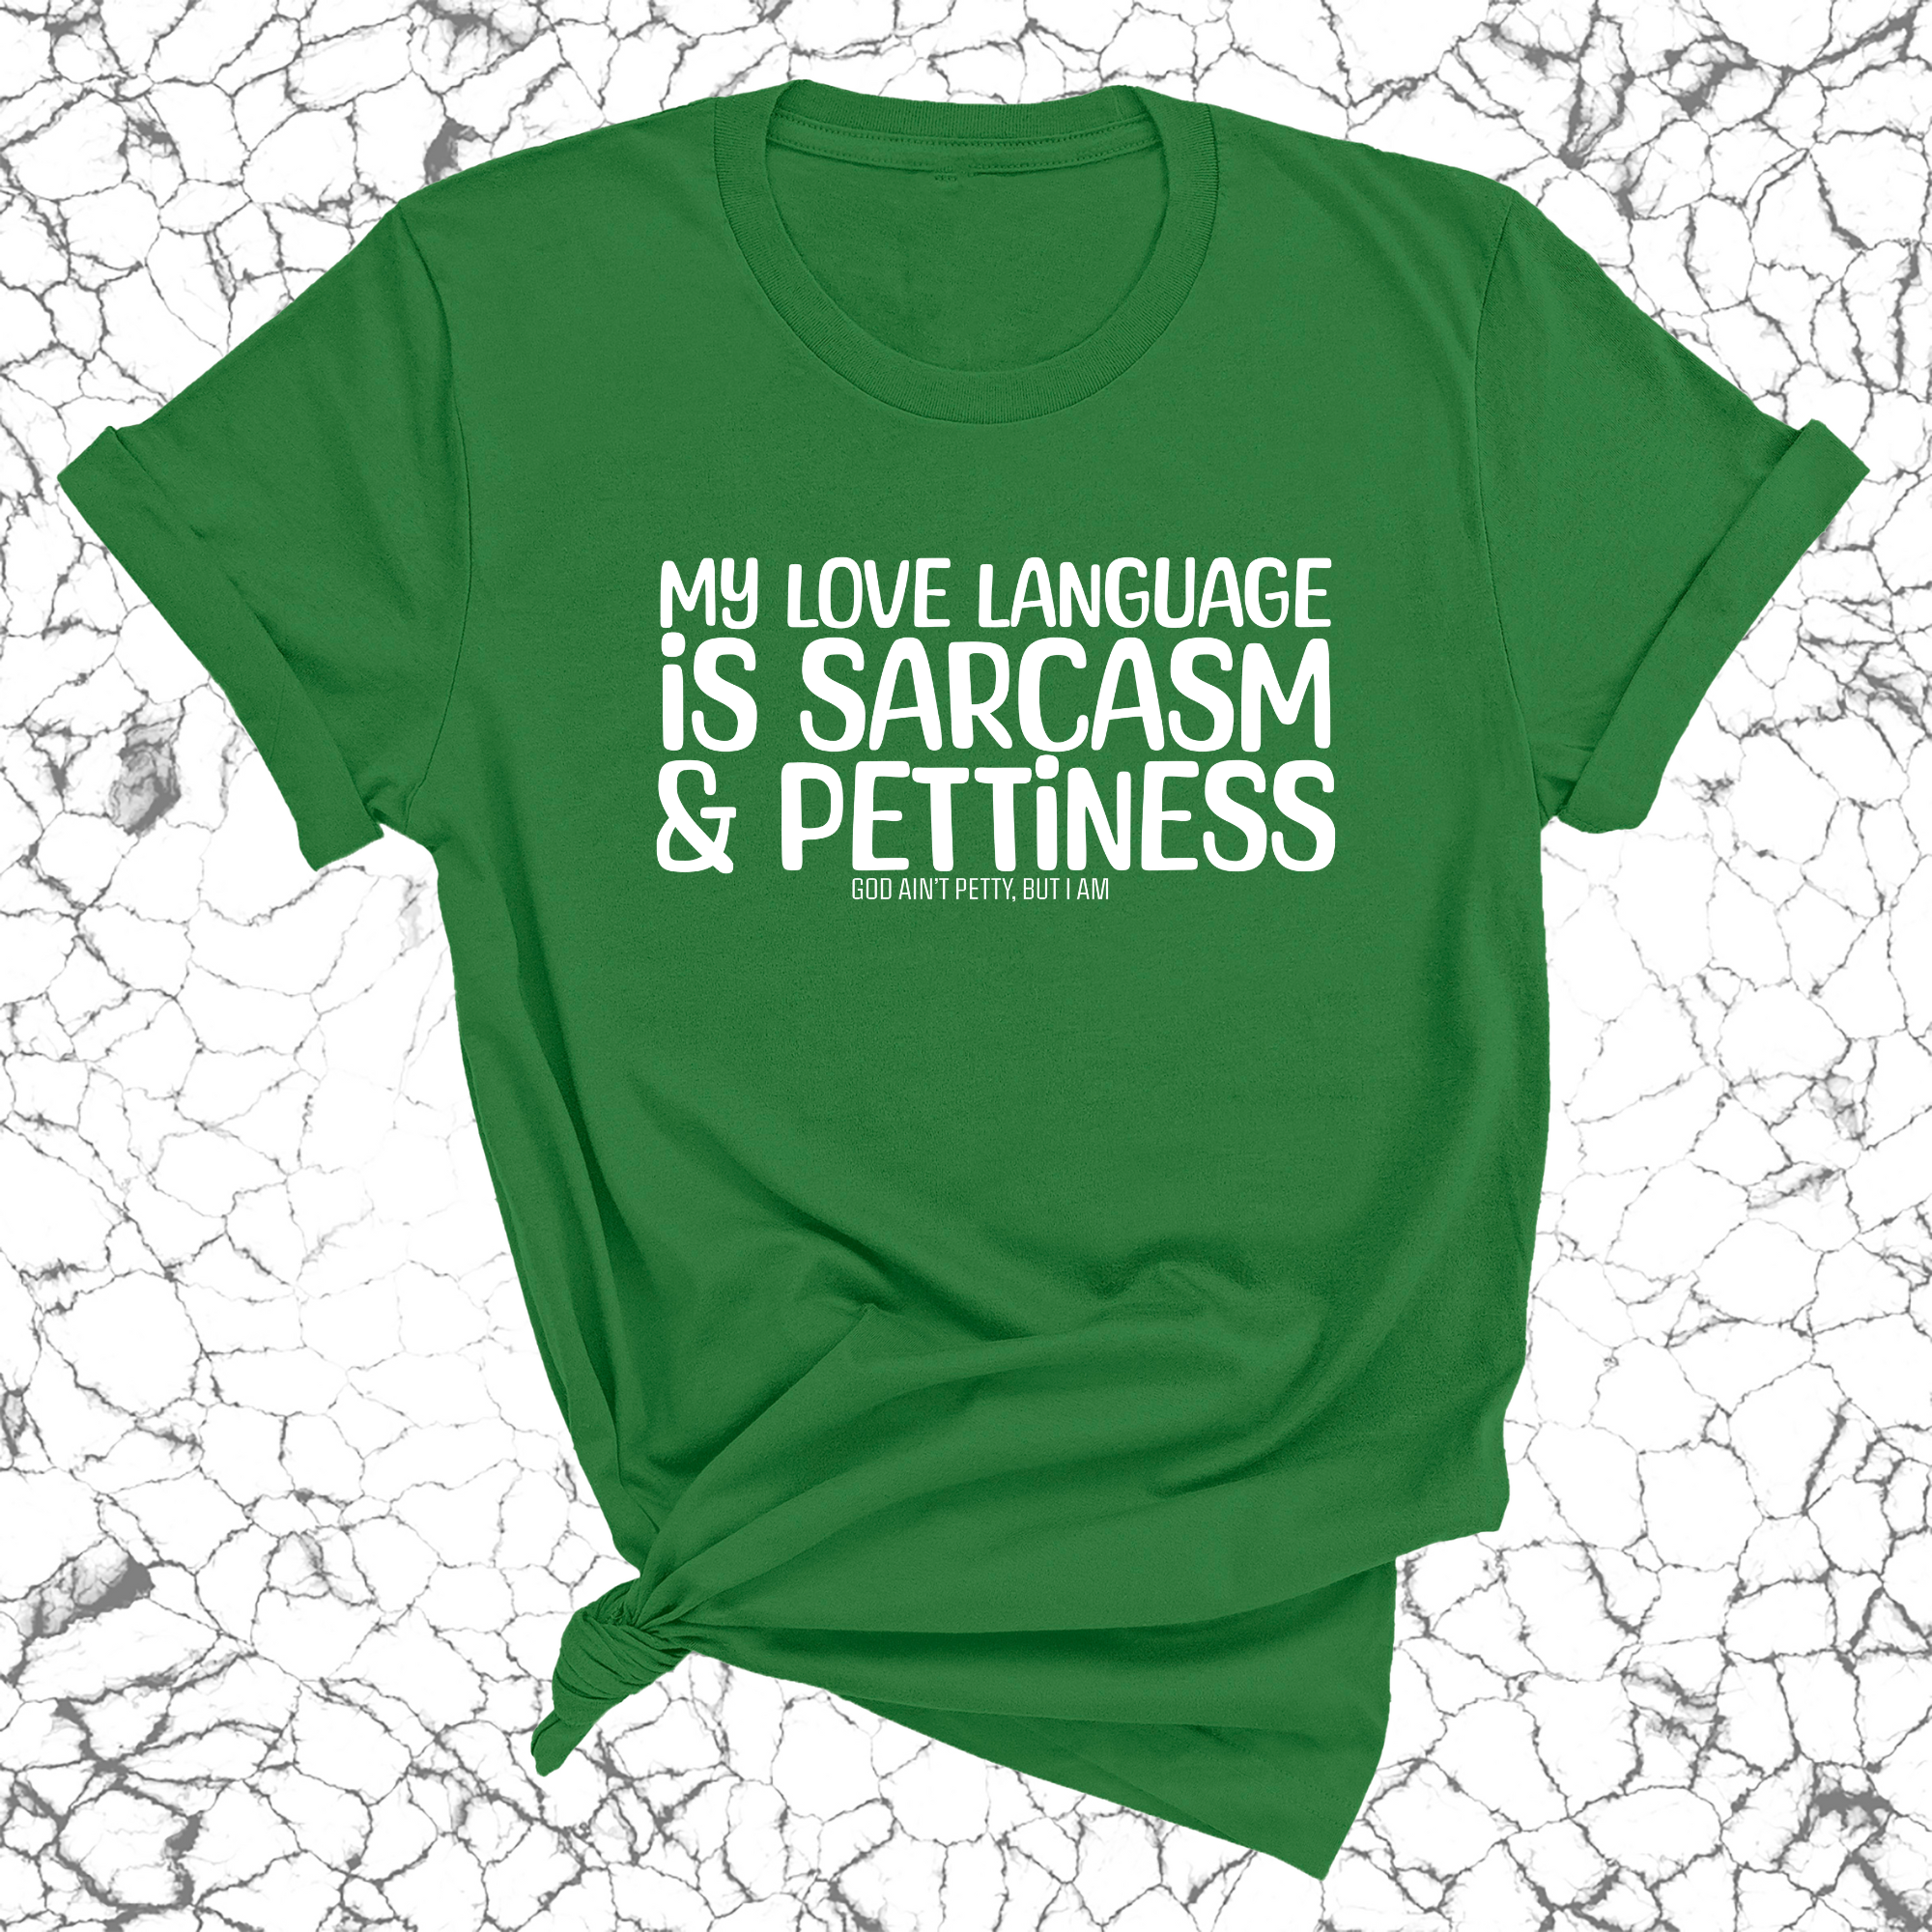 My Love language is Sarcasm and Pettiness Unisex Tee-T-Shirt-The Original God Ain't Petty But I Am